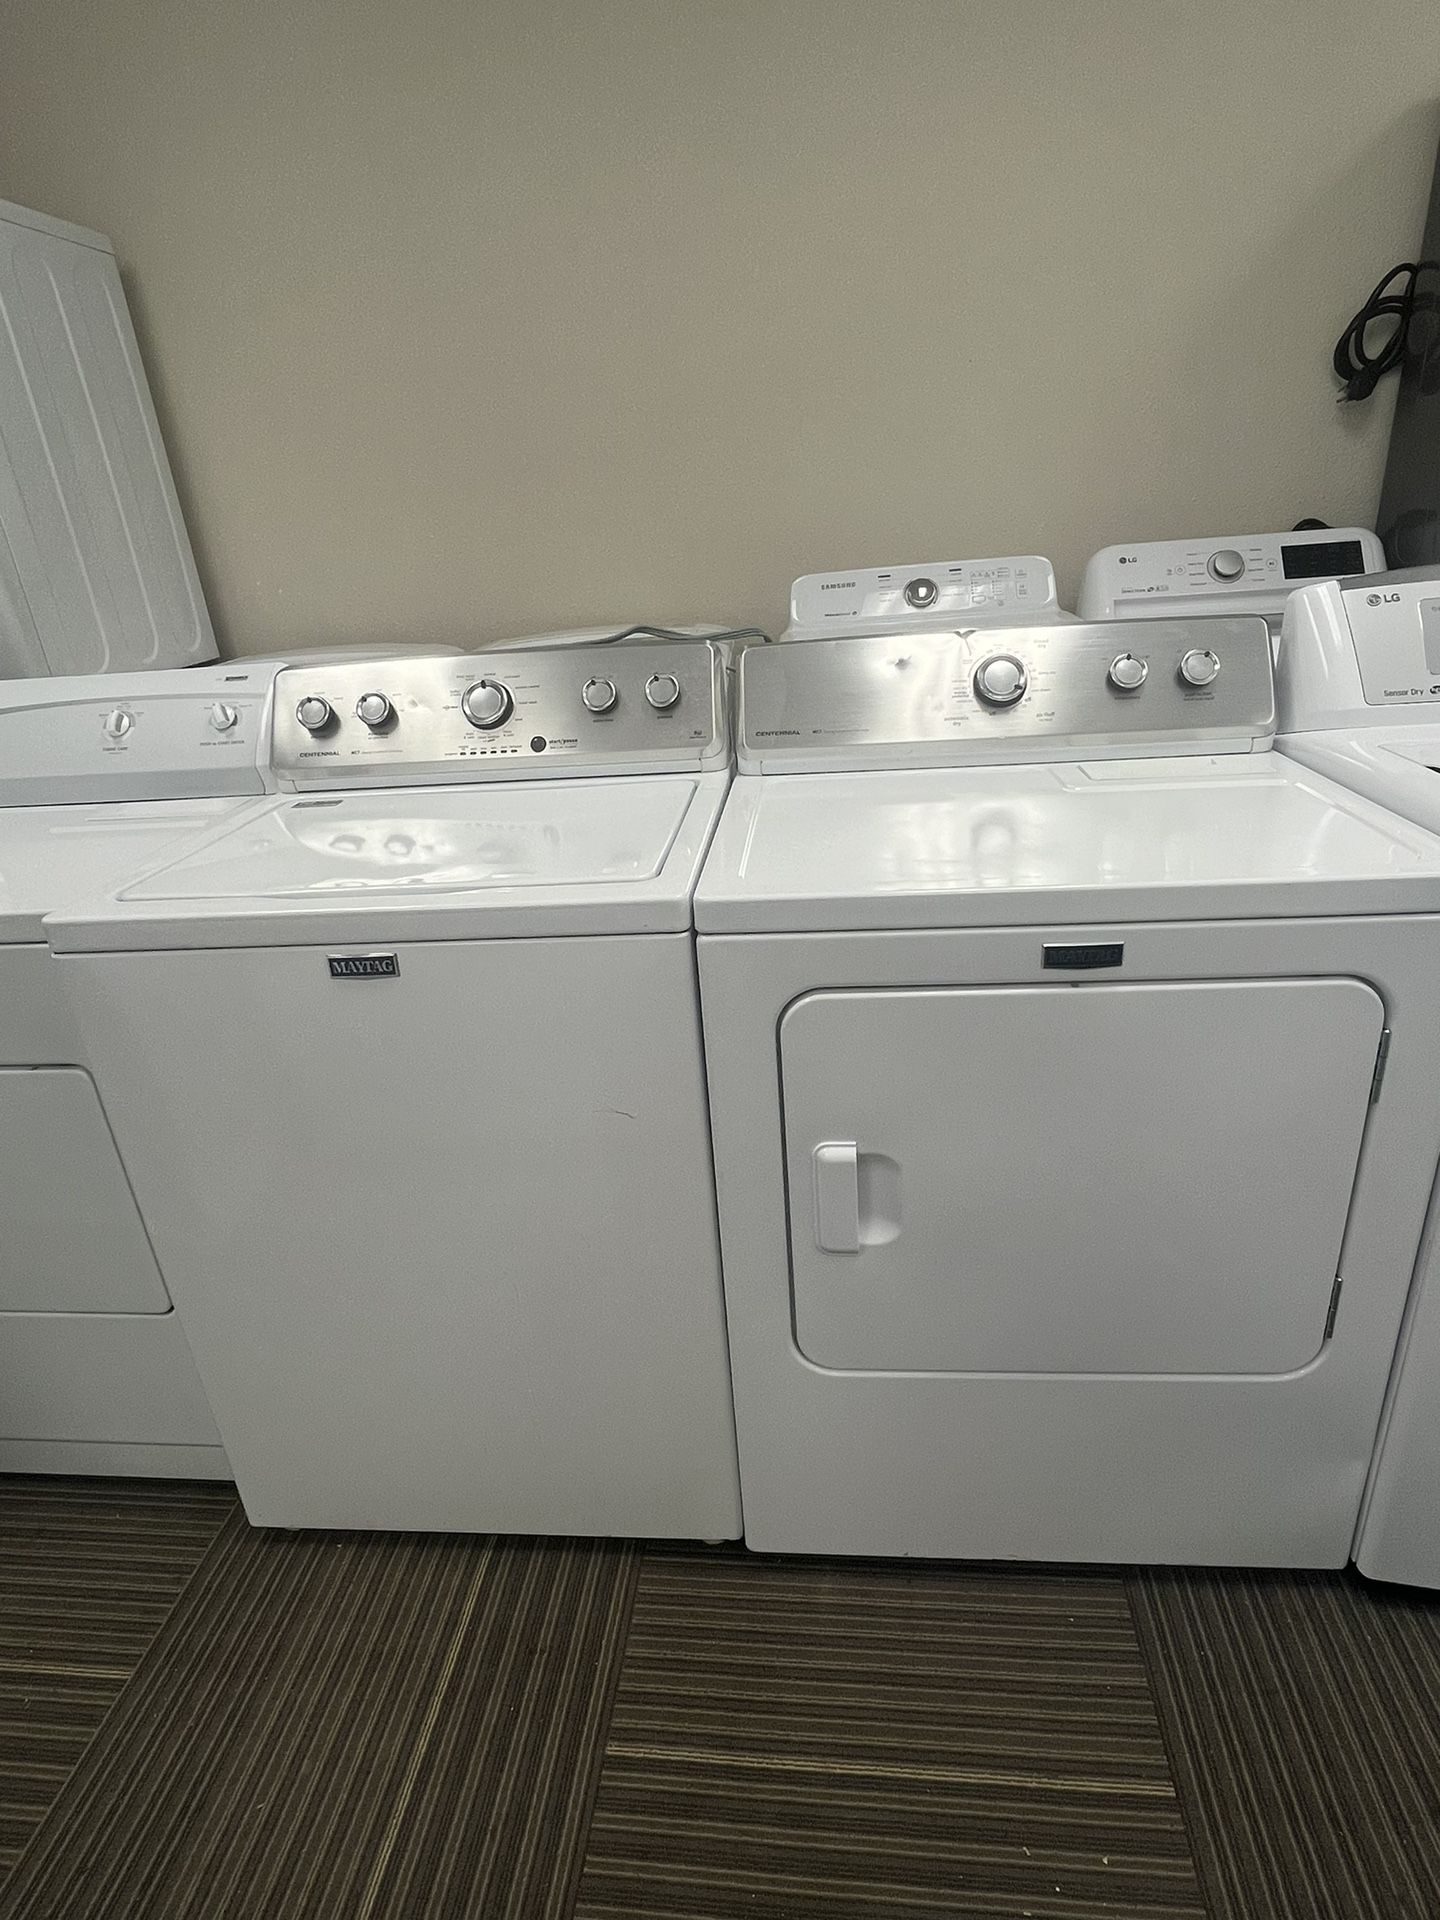 Maytag Washer And Electric Dryer 